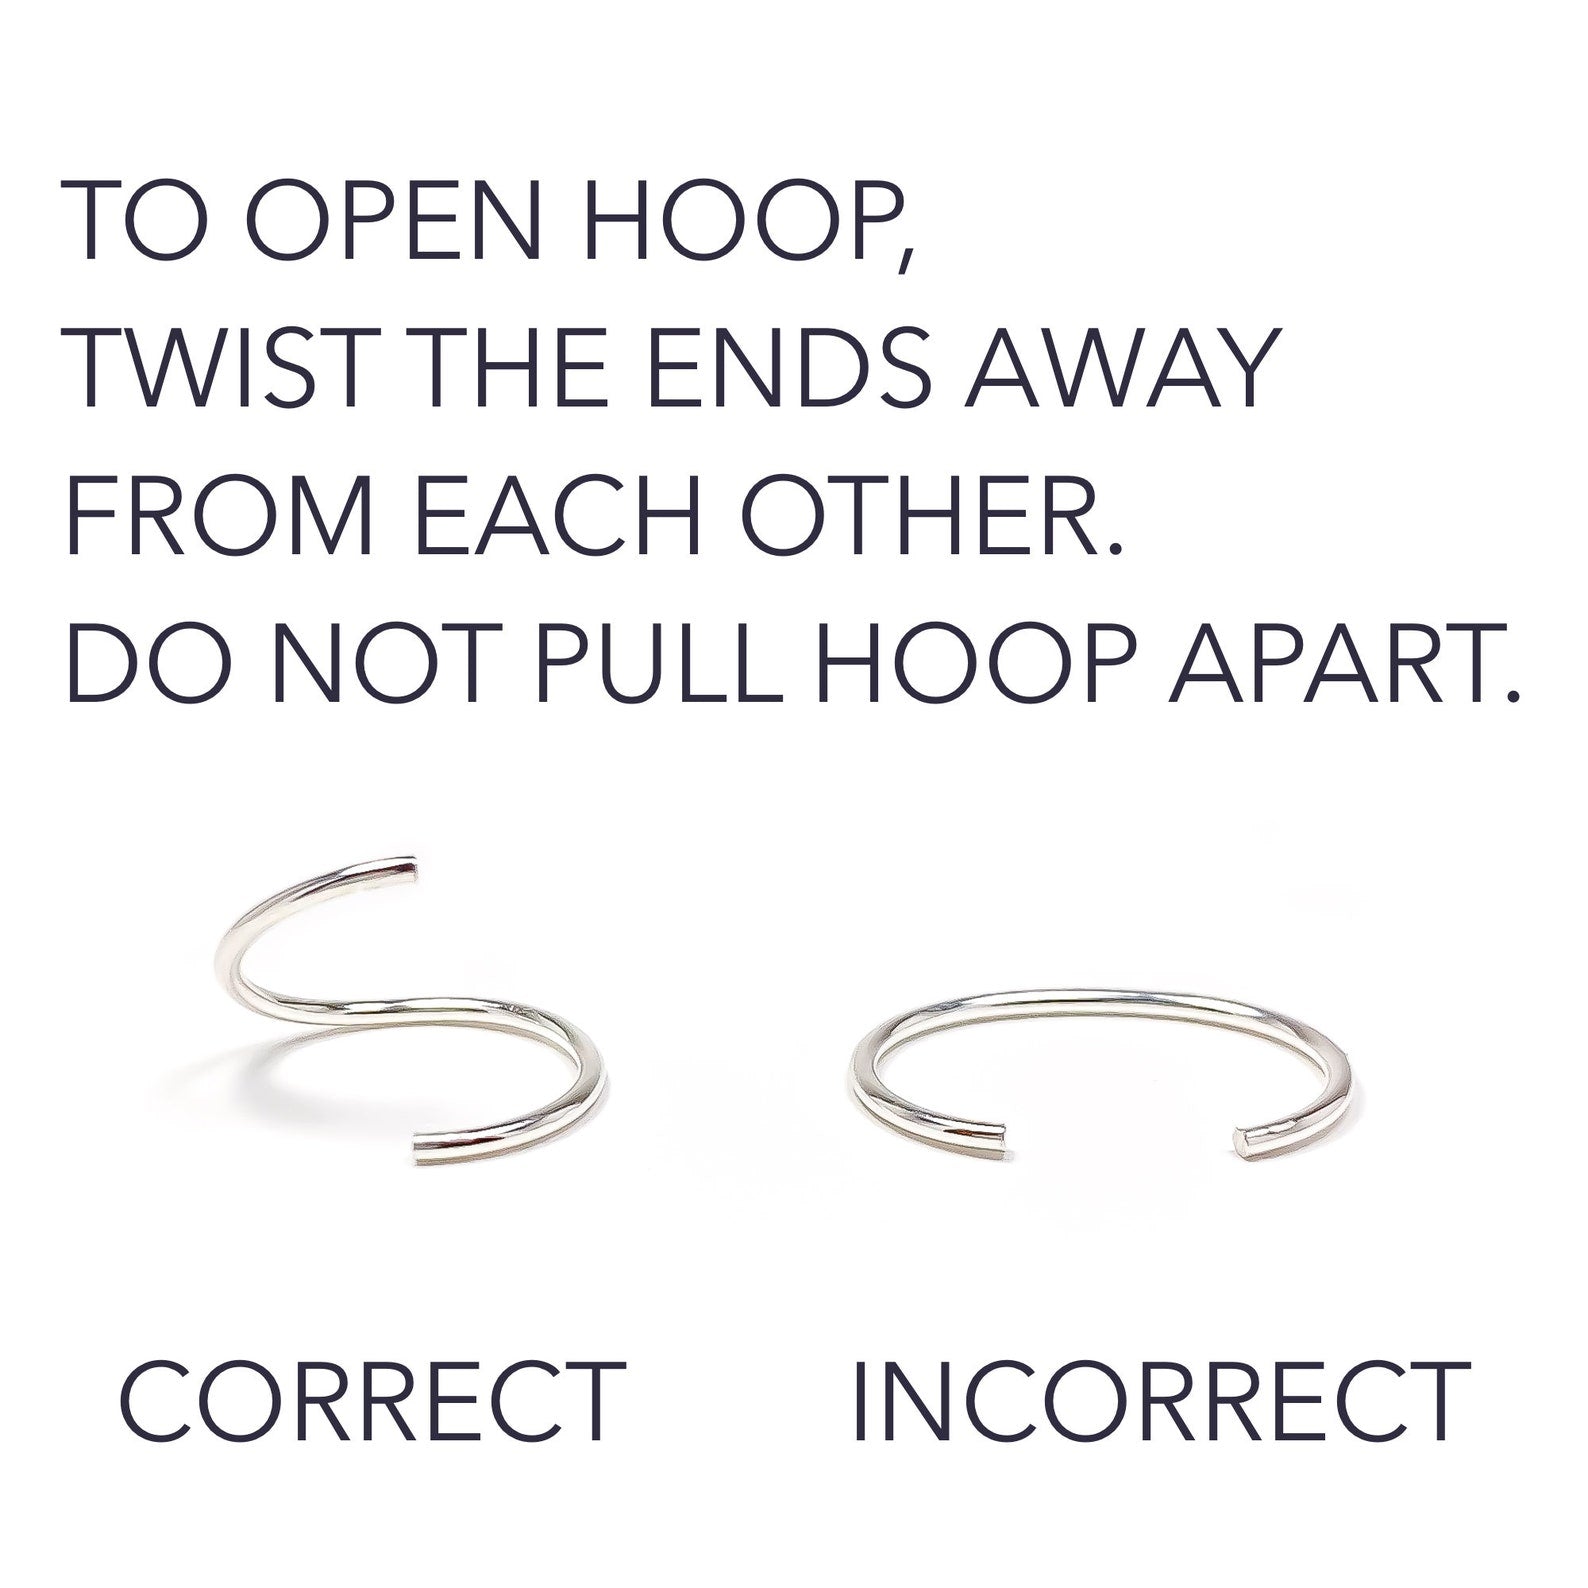 to open hoop, twist the ends away from each other. do not pull hoop apart.